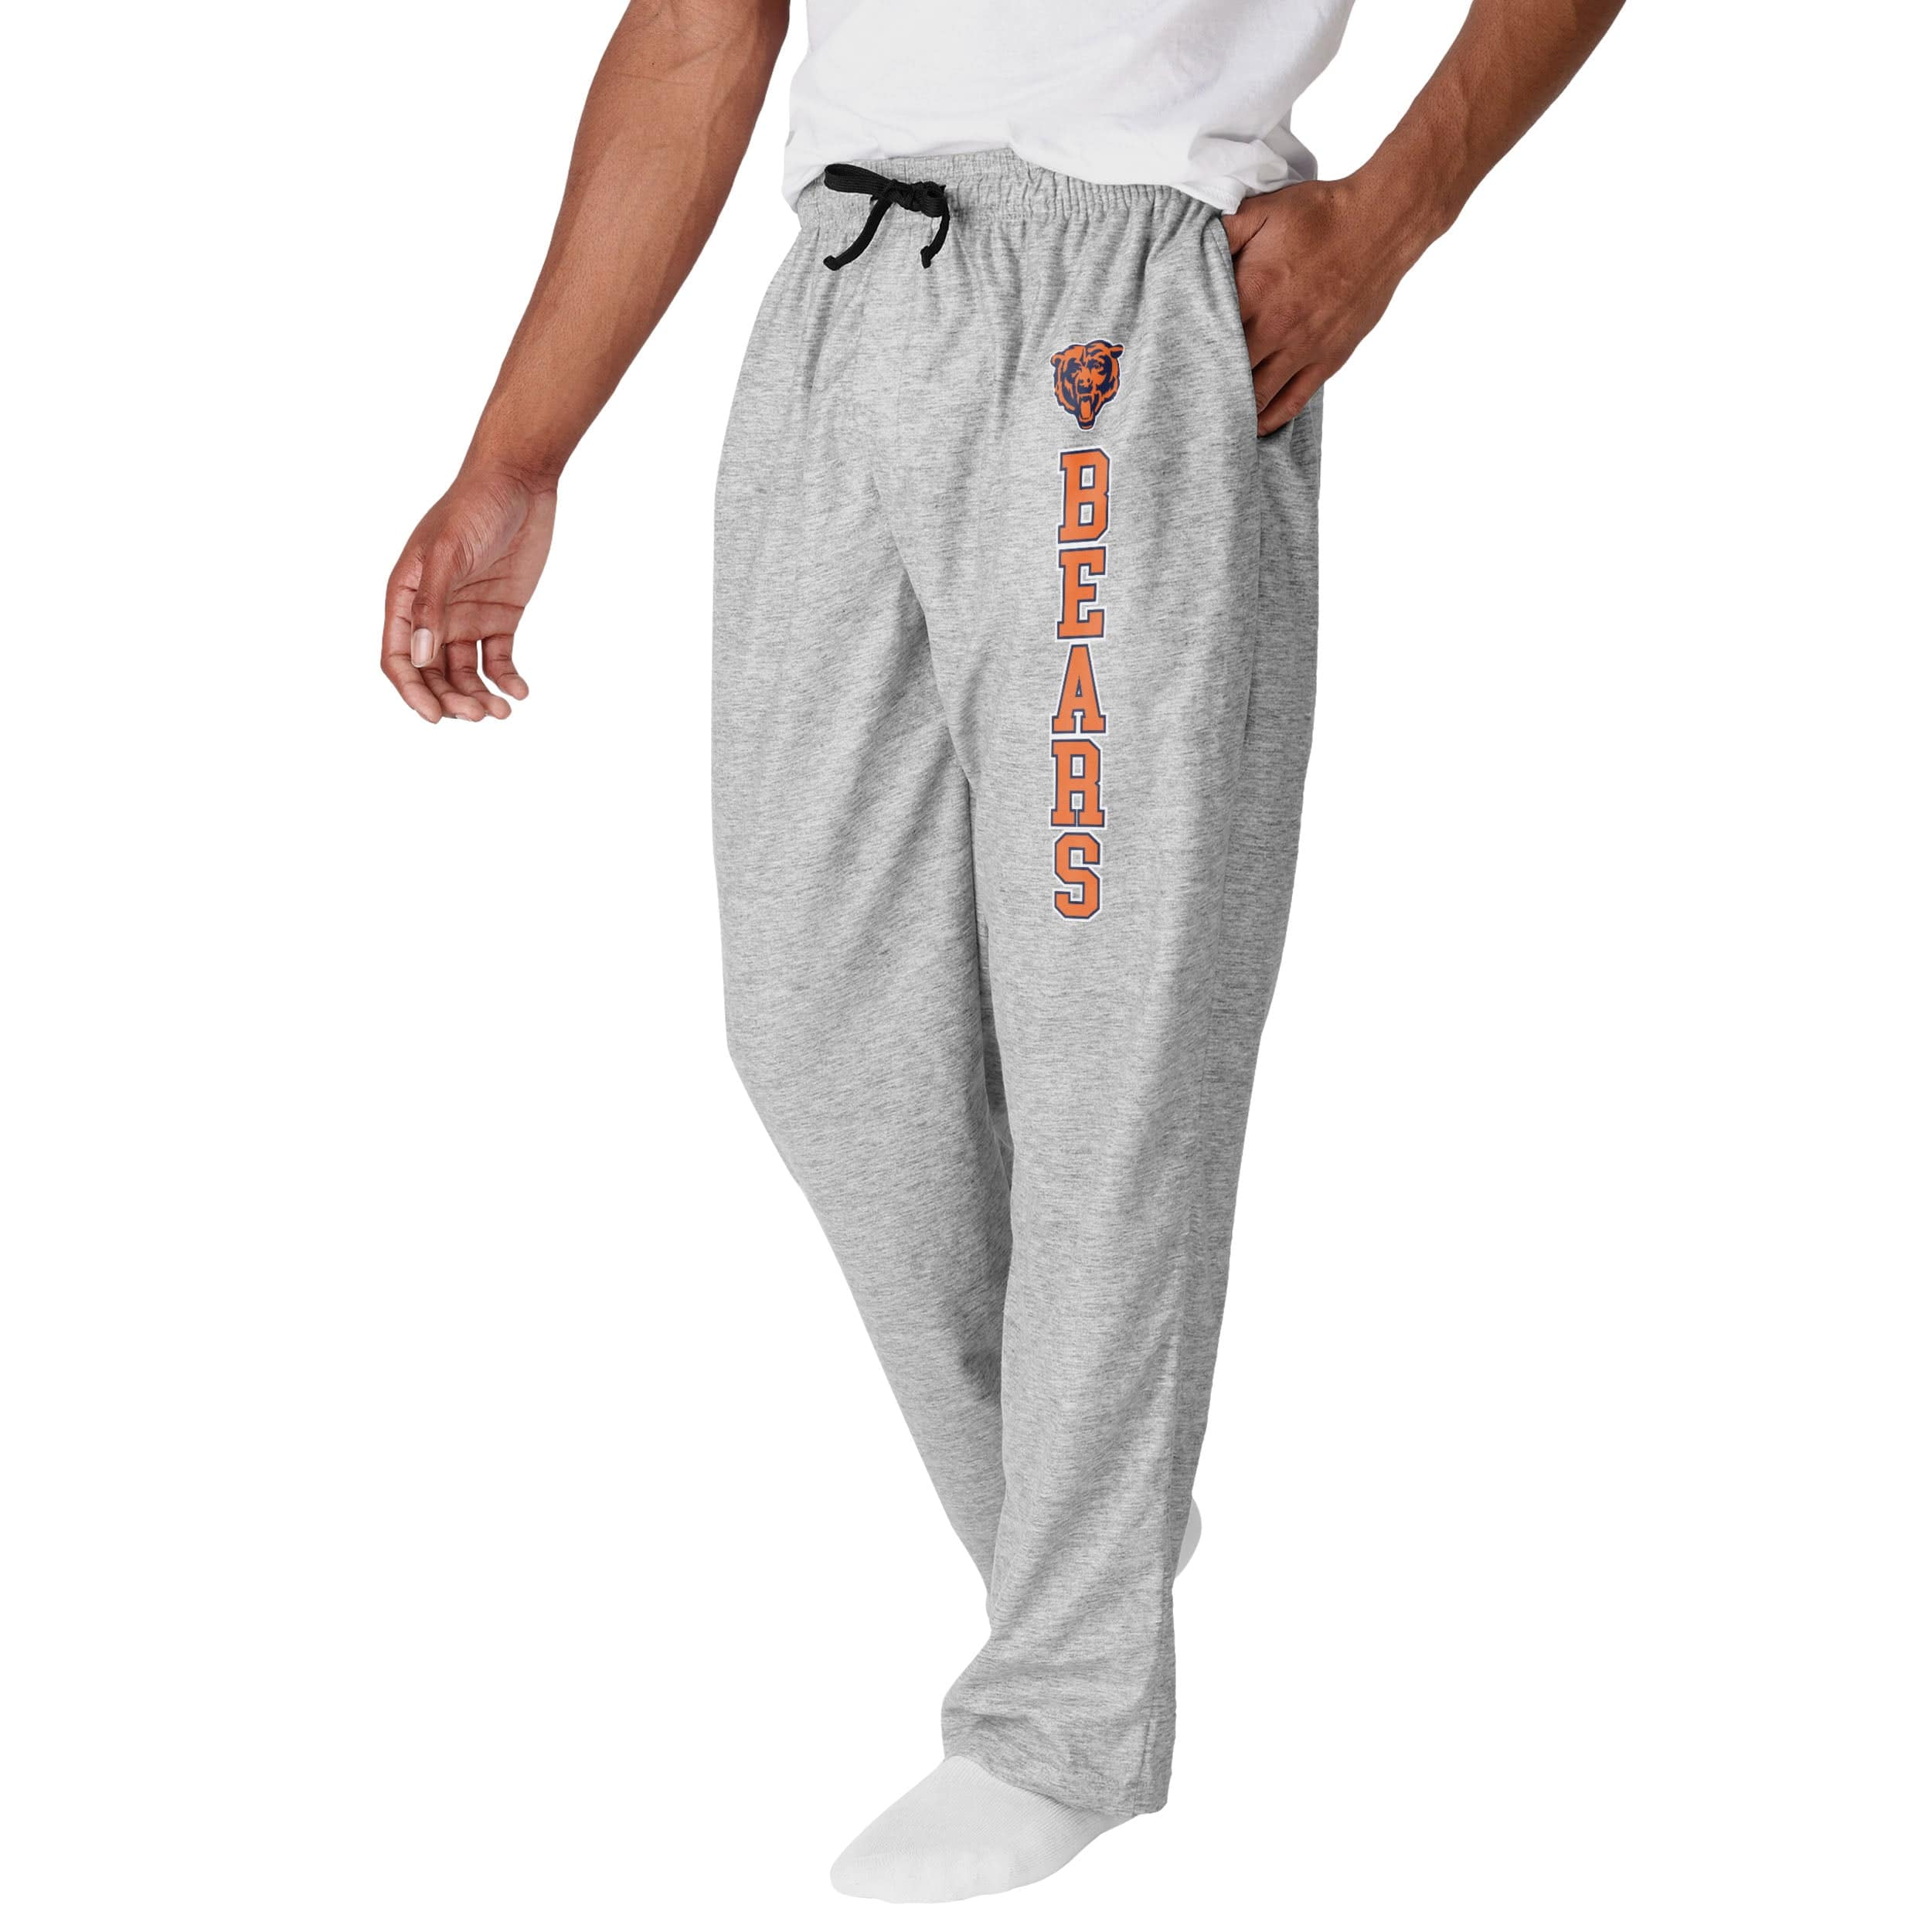 FOCO Chicago Bears NFL Mens Athletic Gray Lounge Pants - M